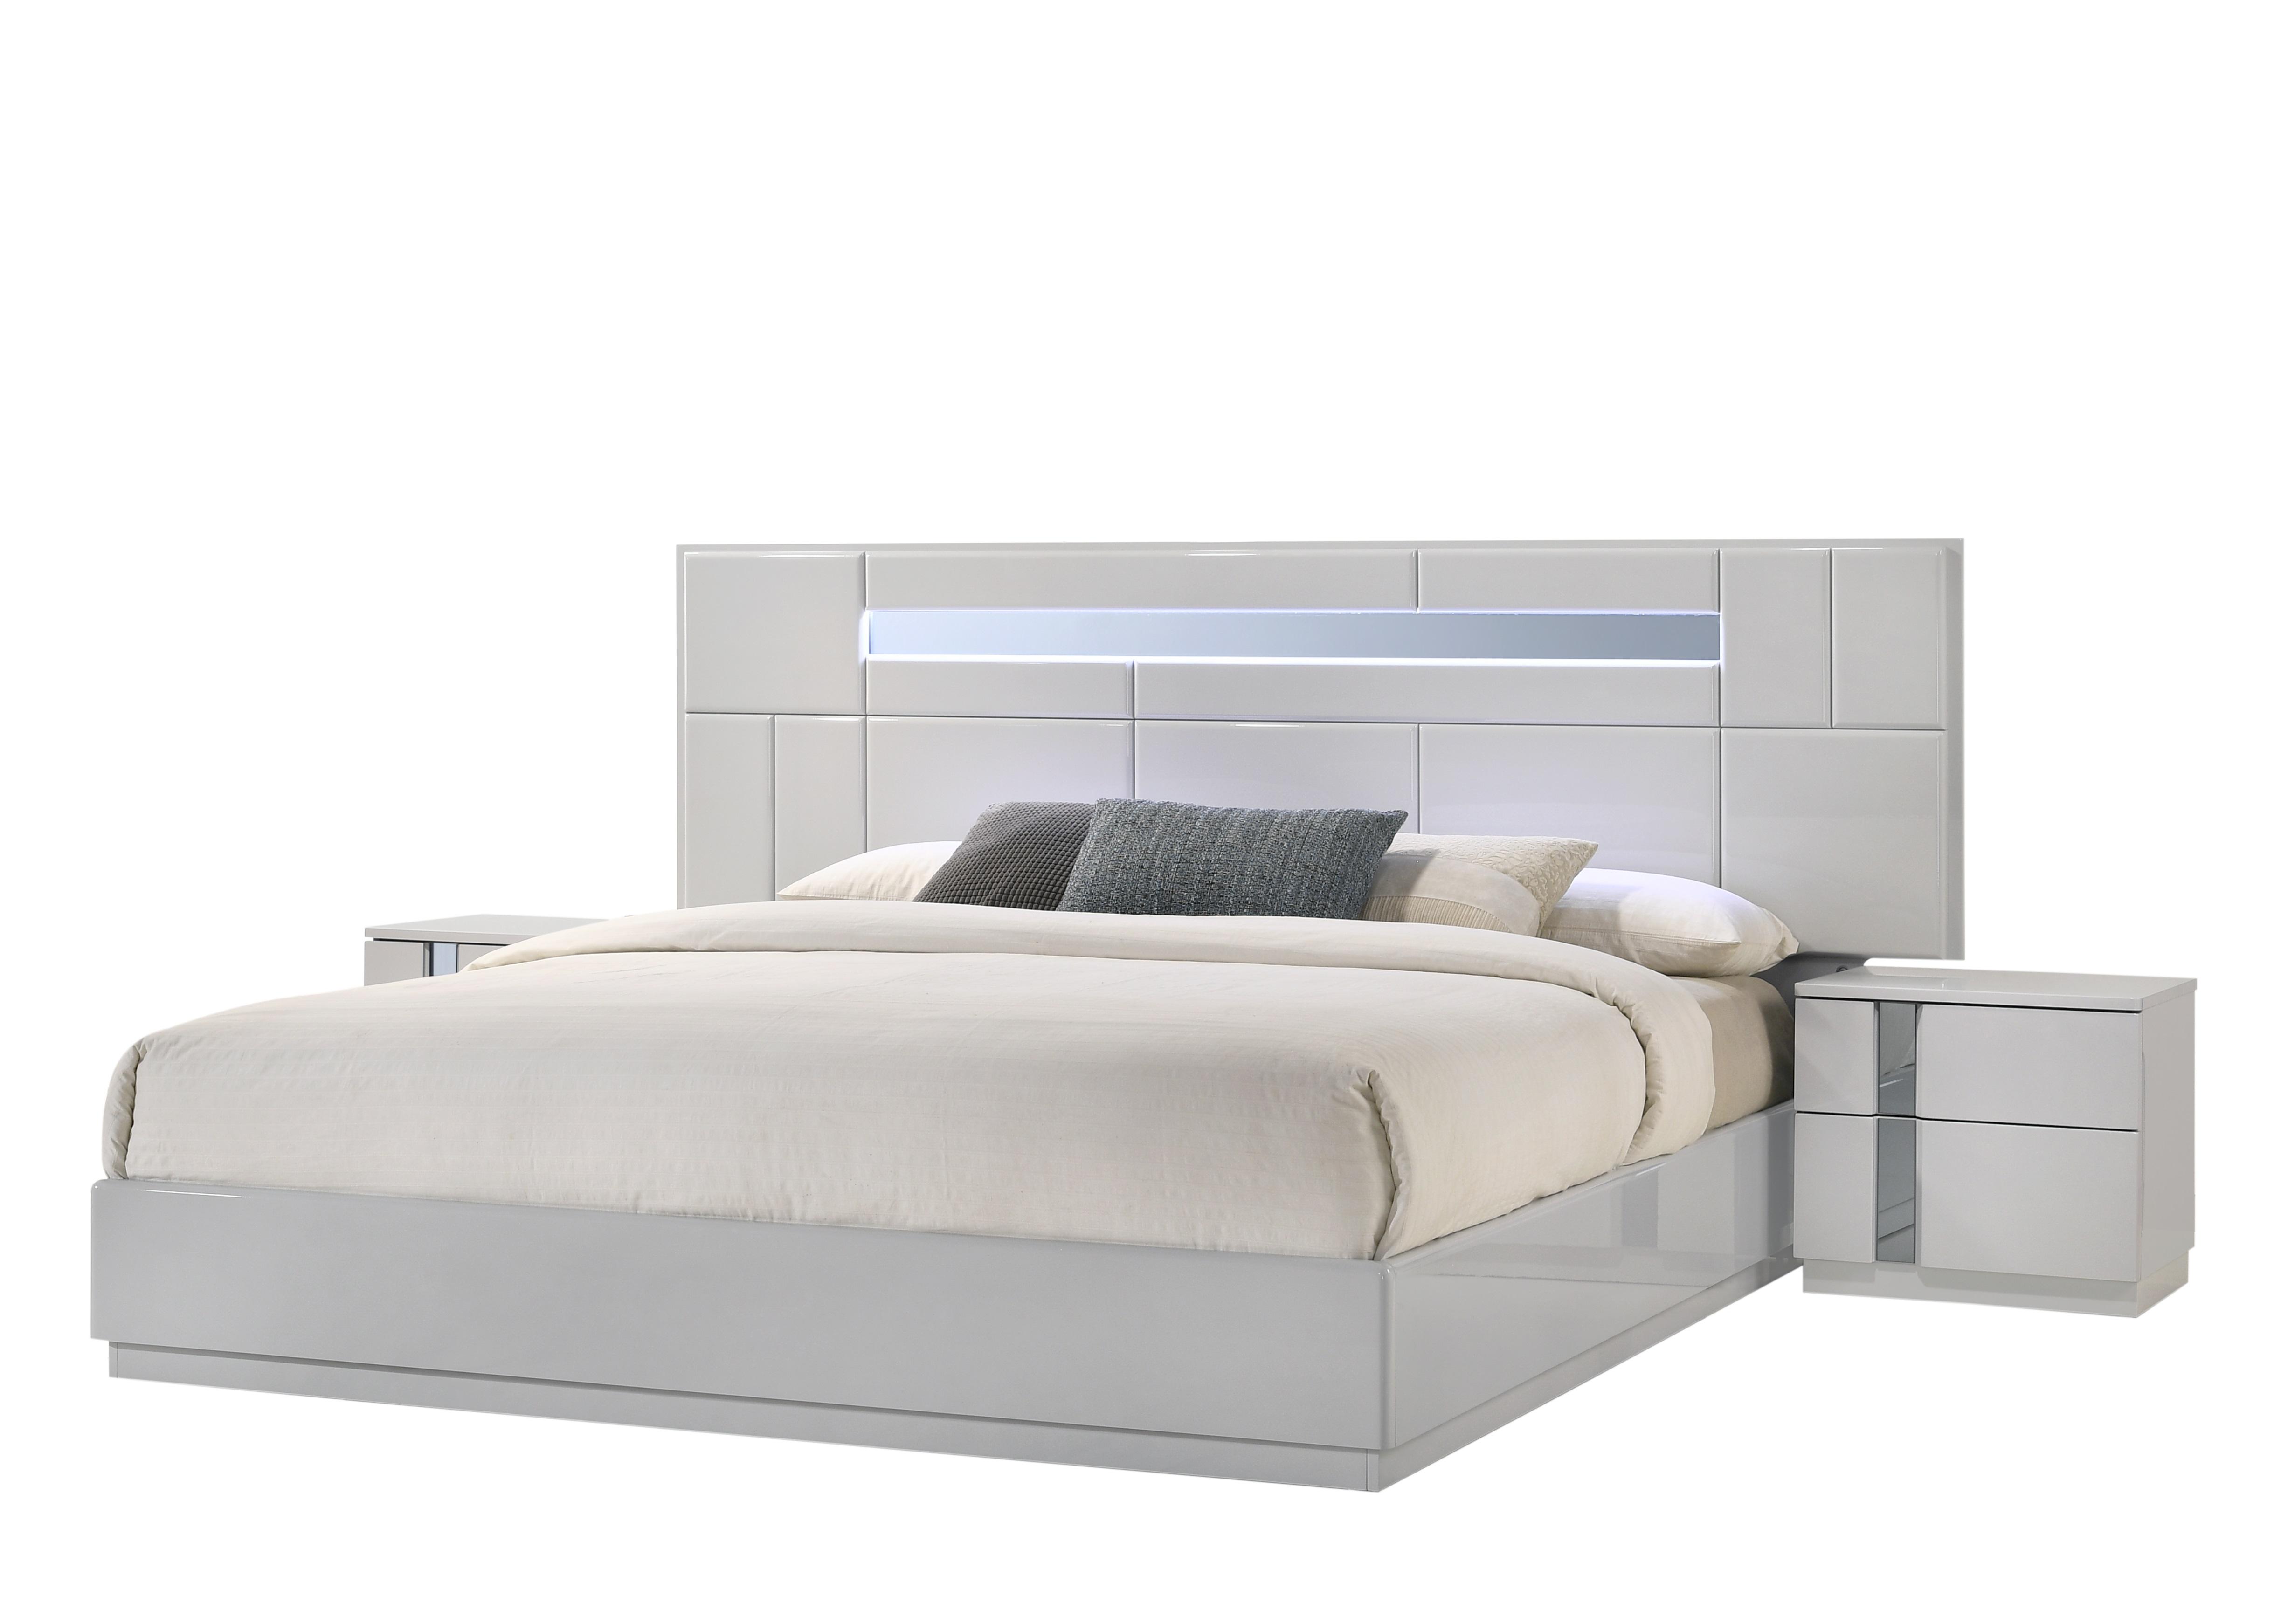 

    
Contemporary Queen Bedroom Set in Gray Lacquer and Chrome Set 3Pcs J&M Palermo
